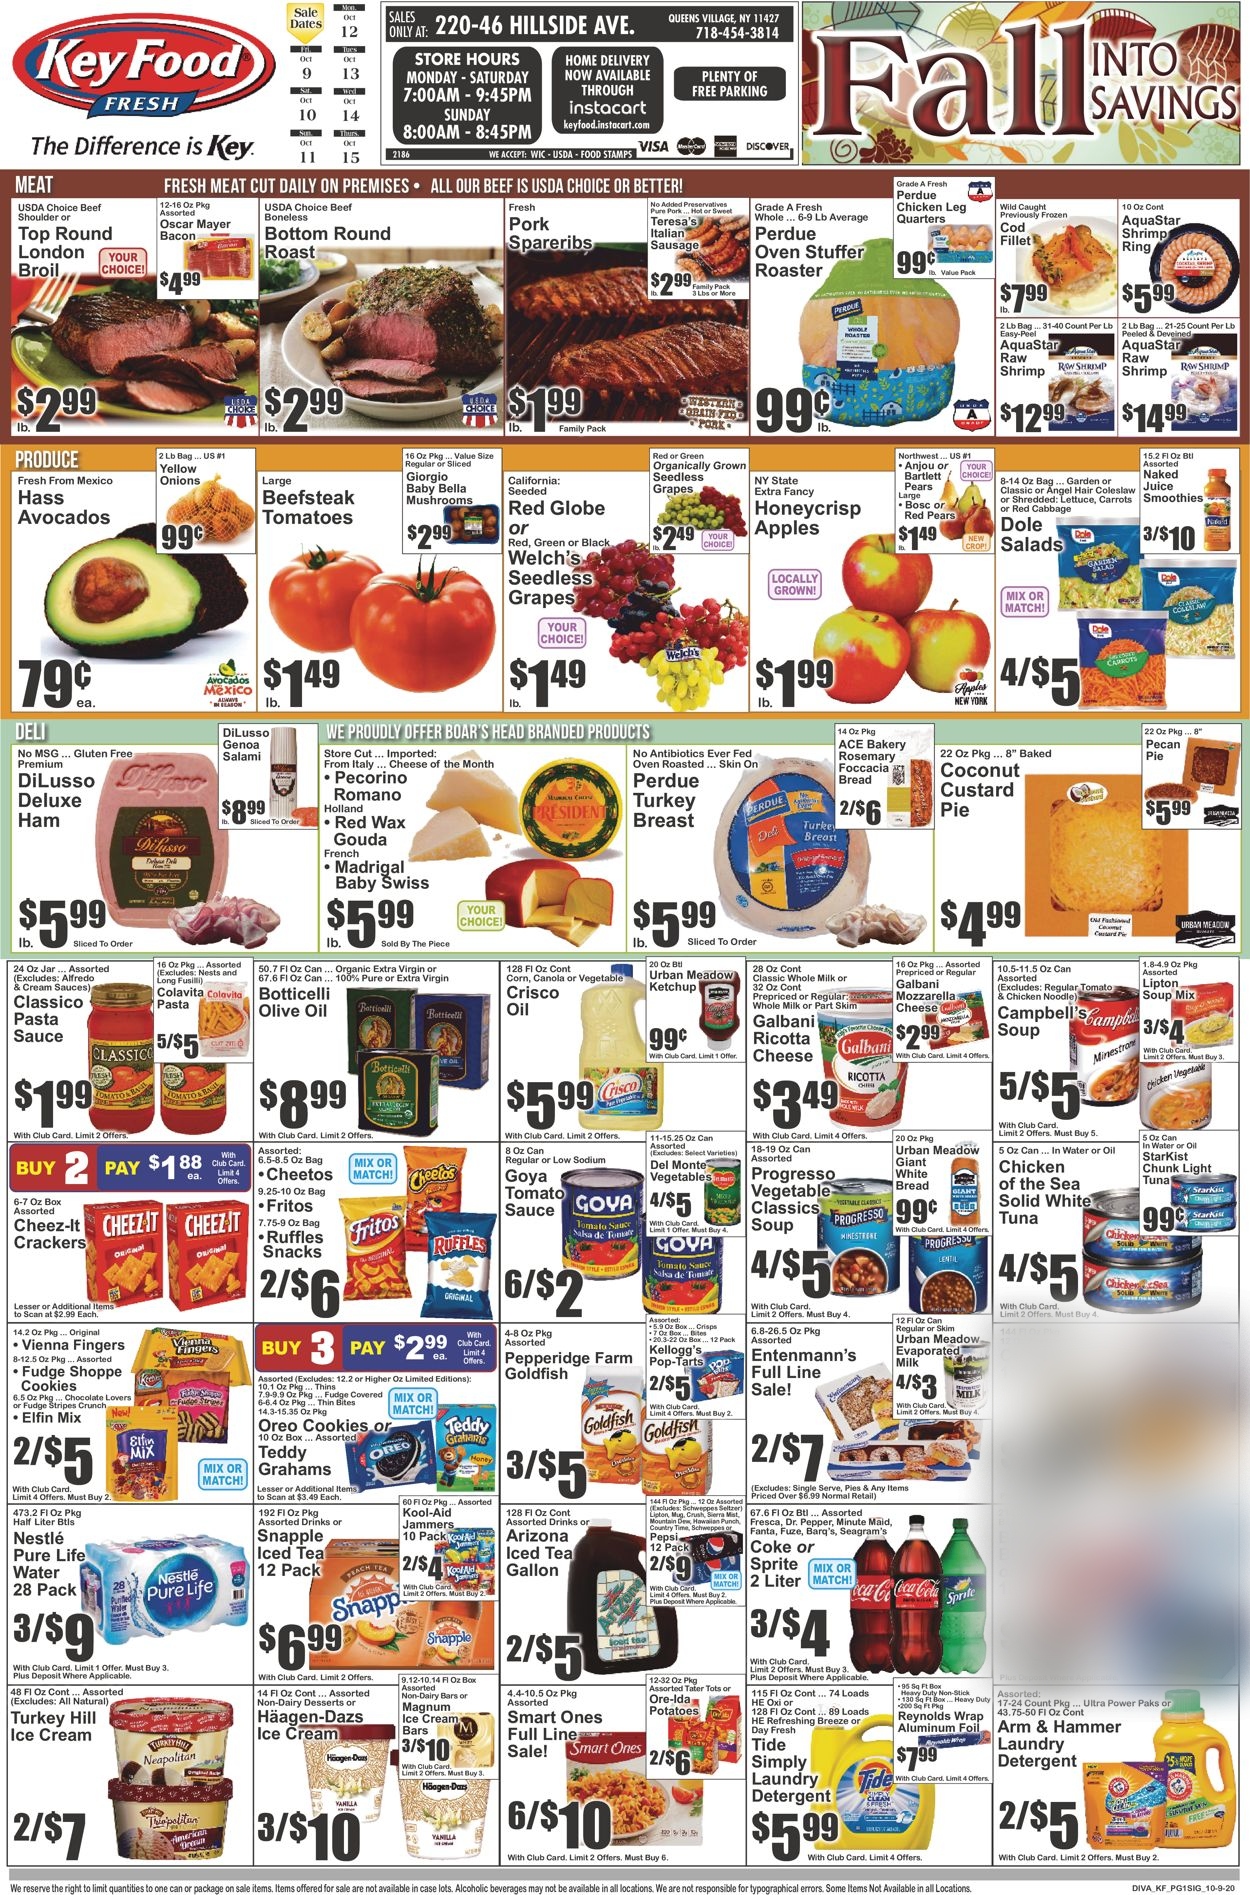 Key Food Current weekly ad 10/09 - 10/15/2020 - frequent-ads.com